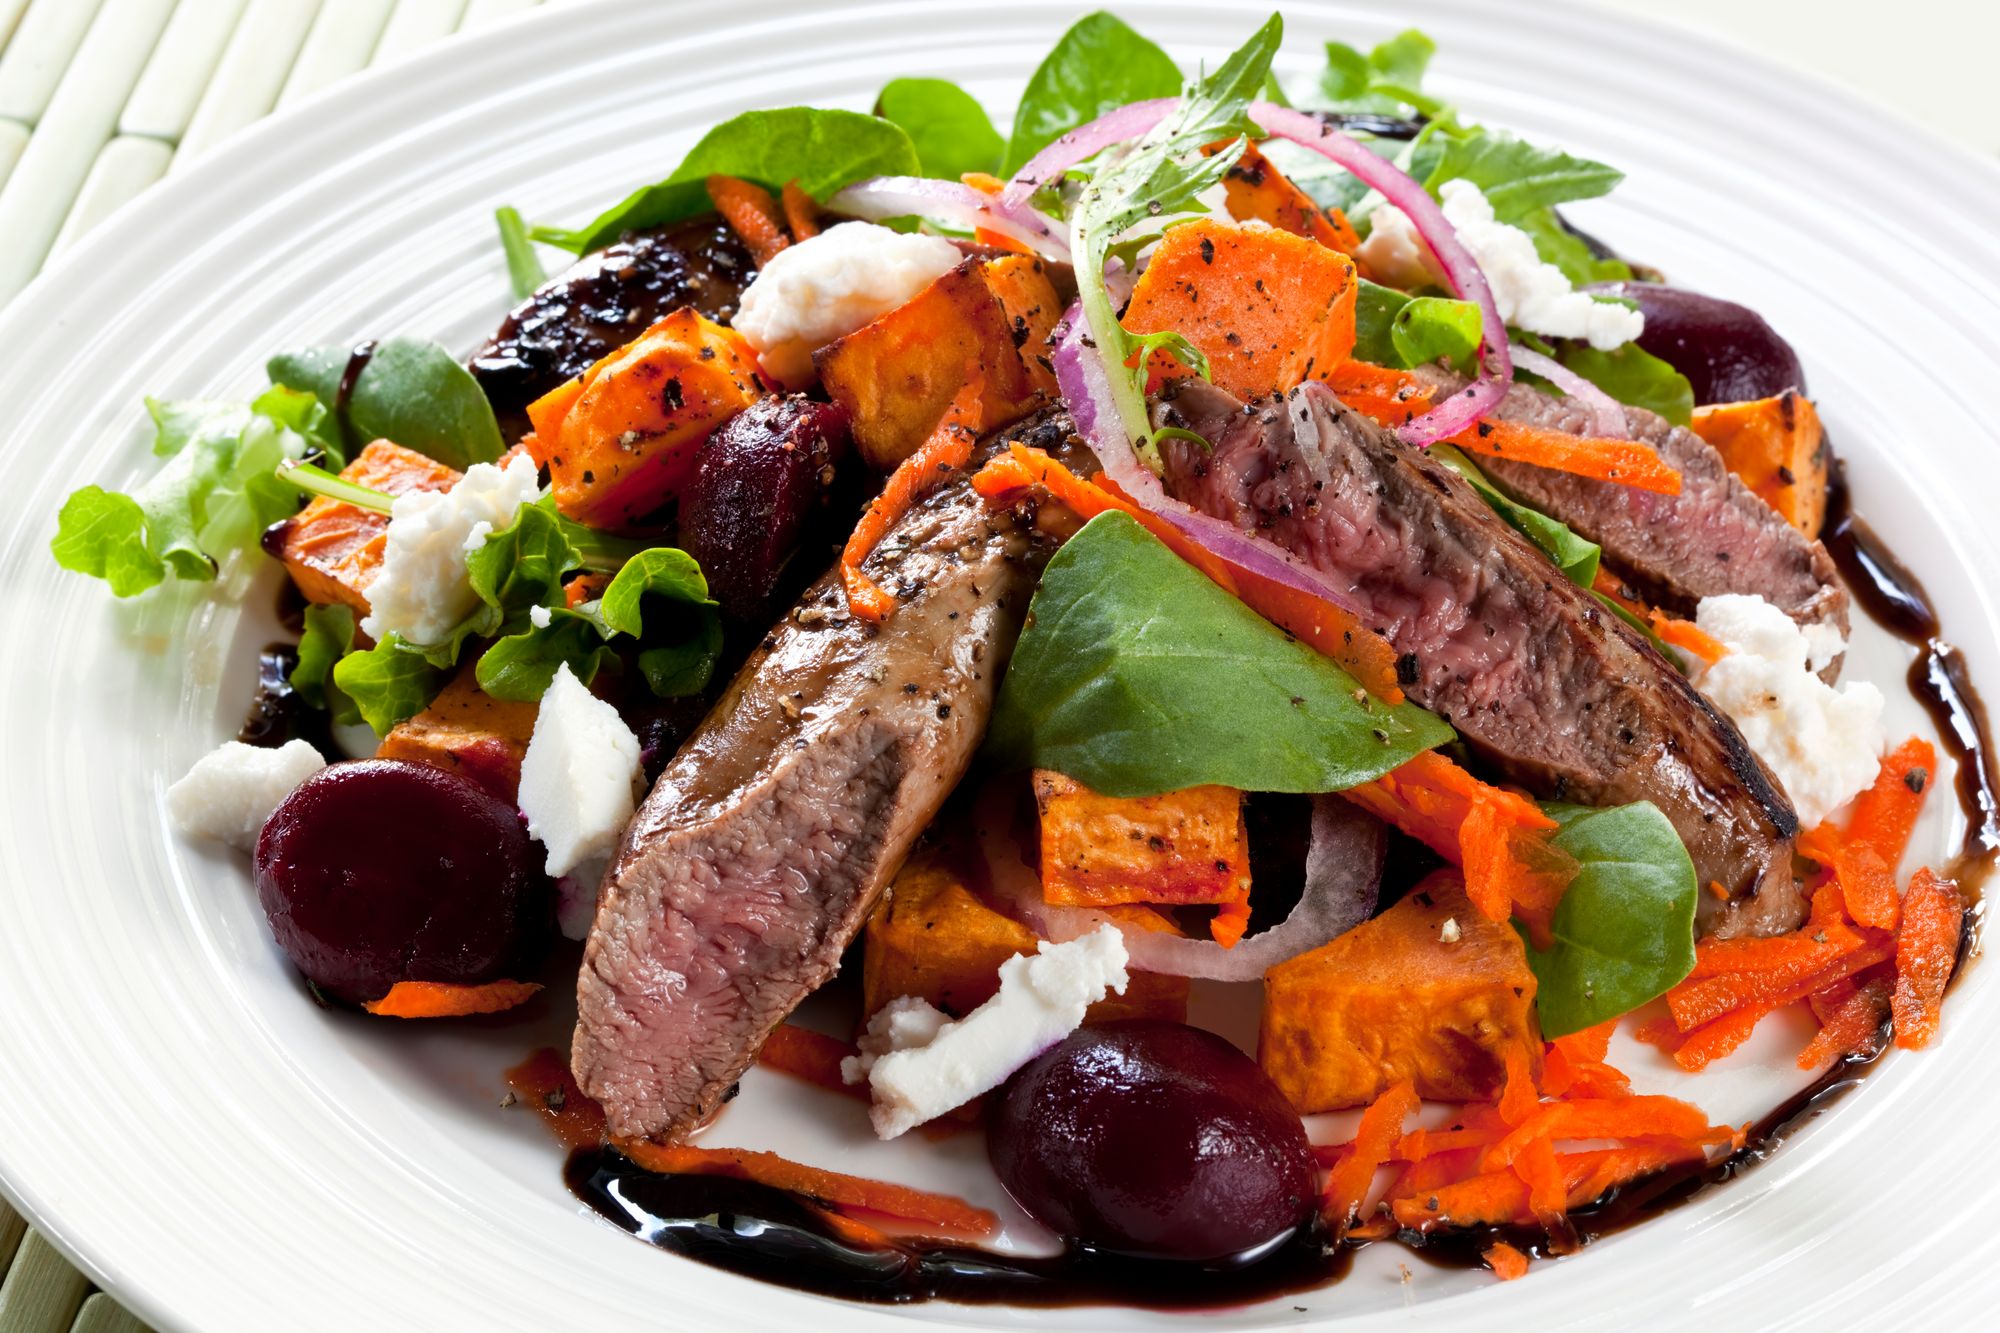 Leg of Lamb with Goat’s Cheese Salad